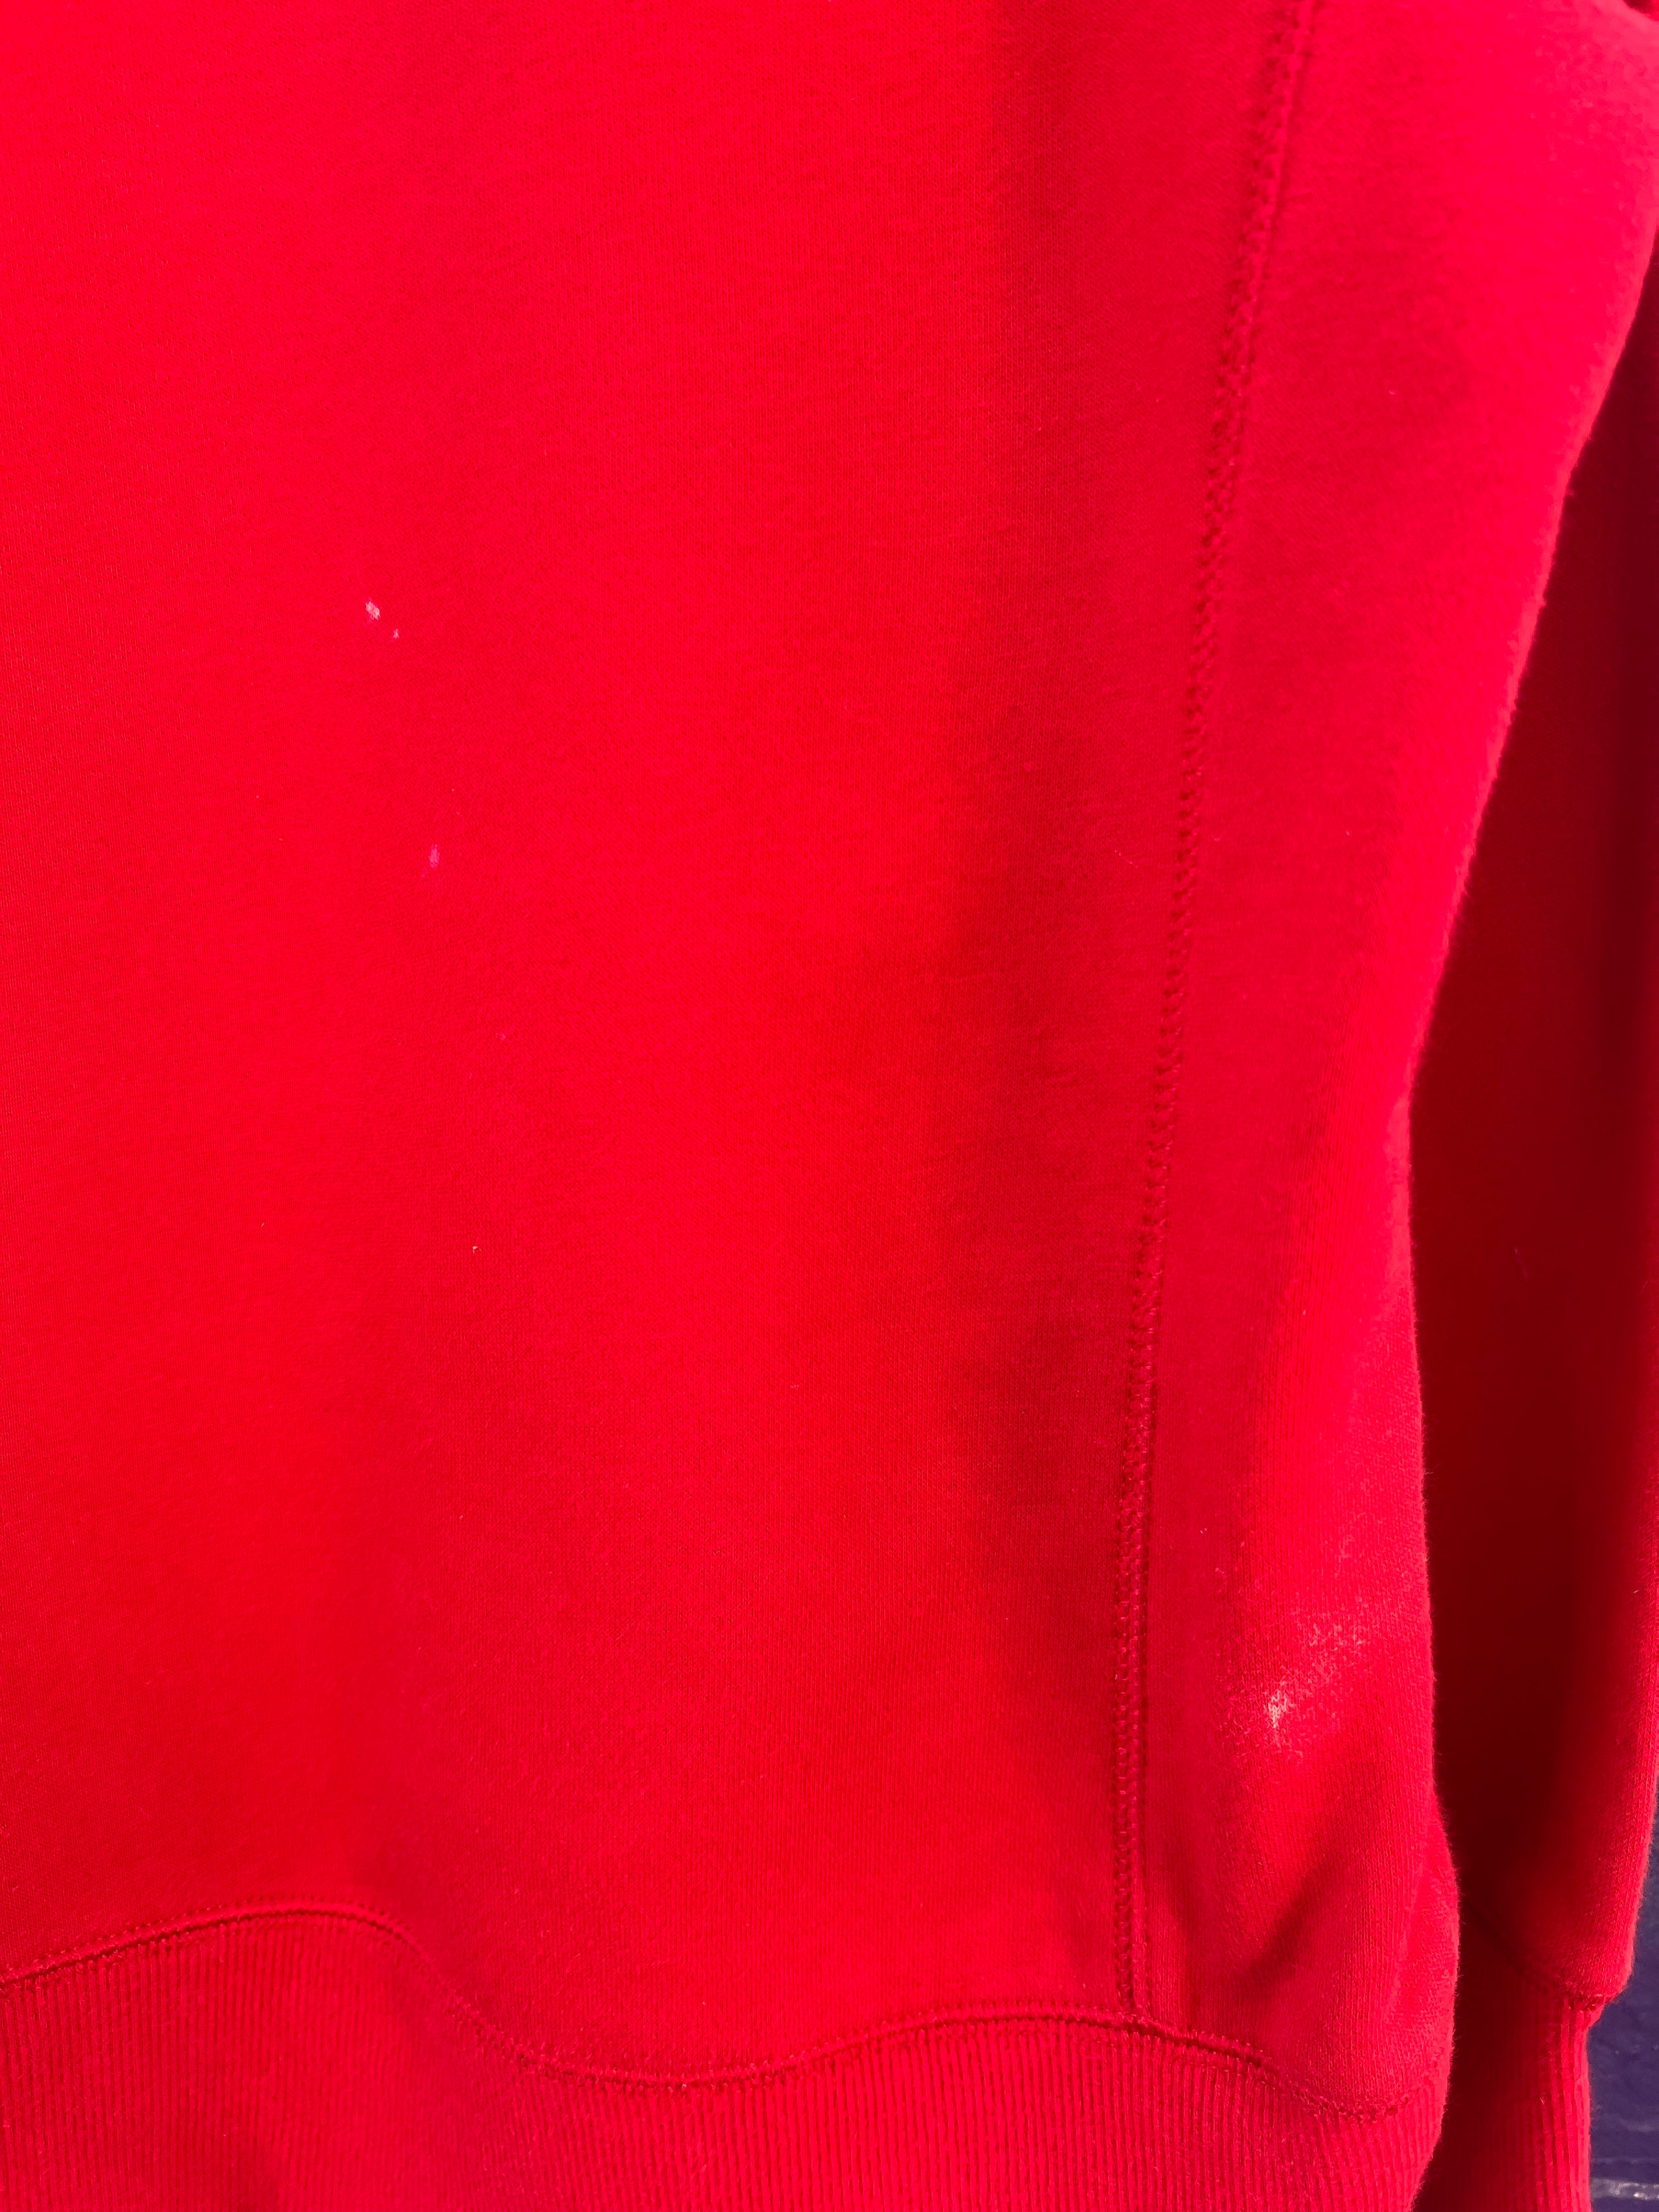 L  -Russell Athletic Red Basic Hoodie